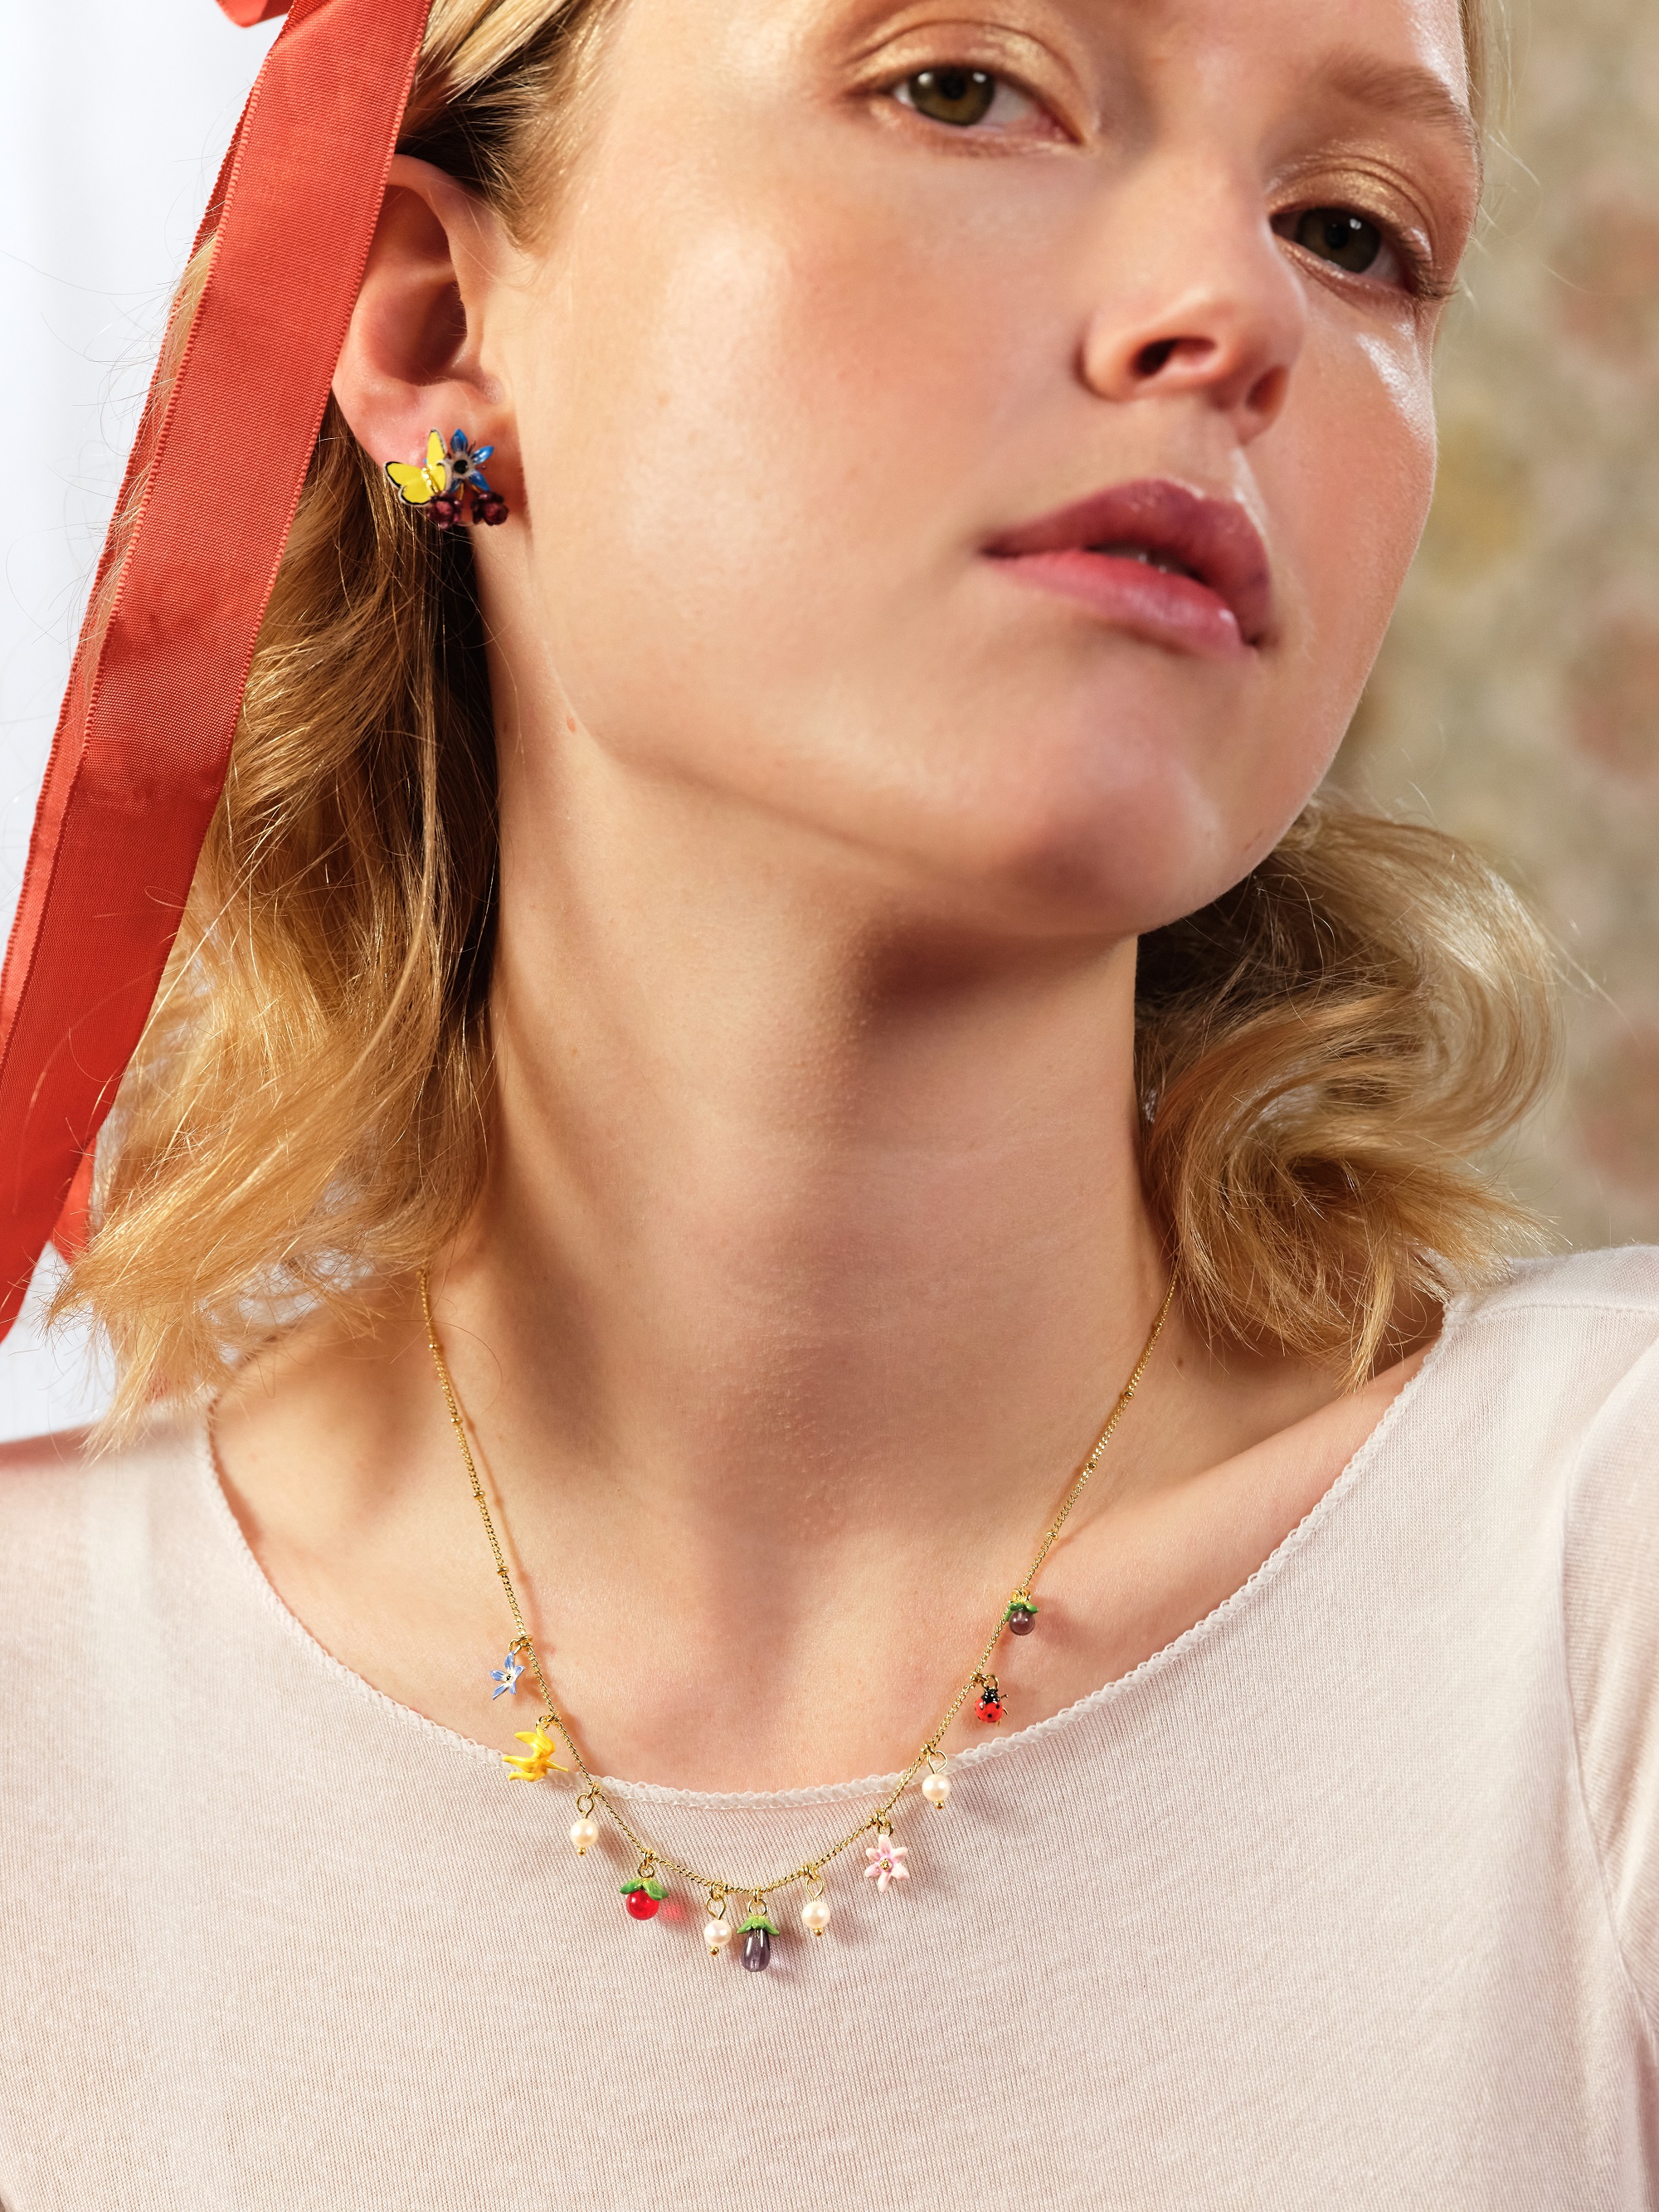 WONDERFUL VEGETABLE GARDEN AND MOTHER-OF PEARL CHARM NECKLACE_4_$1540.jpg